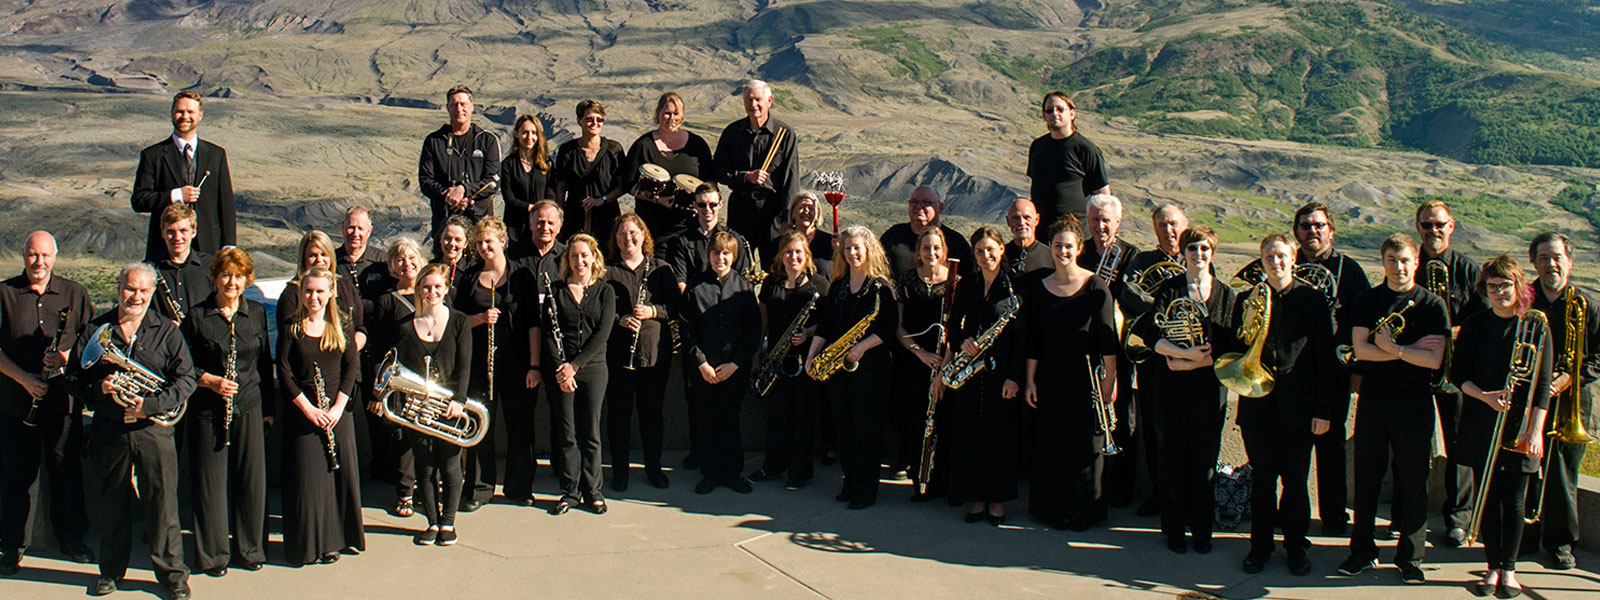 LCC Symphonic Band Performs at Mount St. Helens